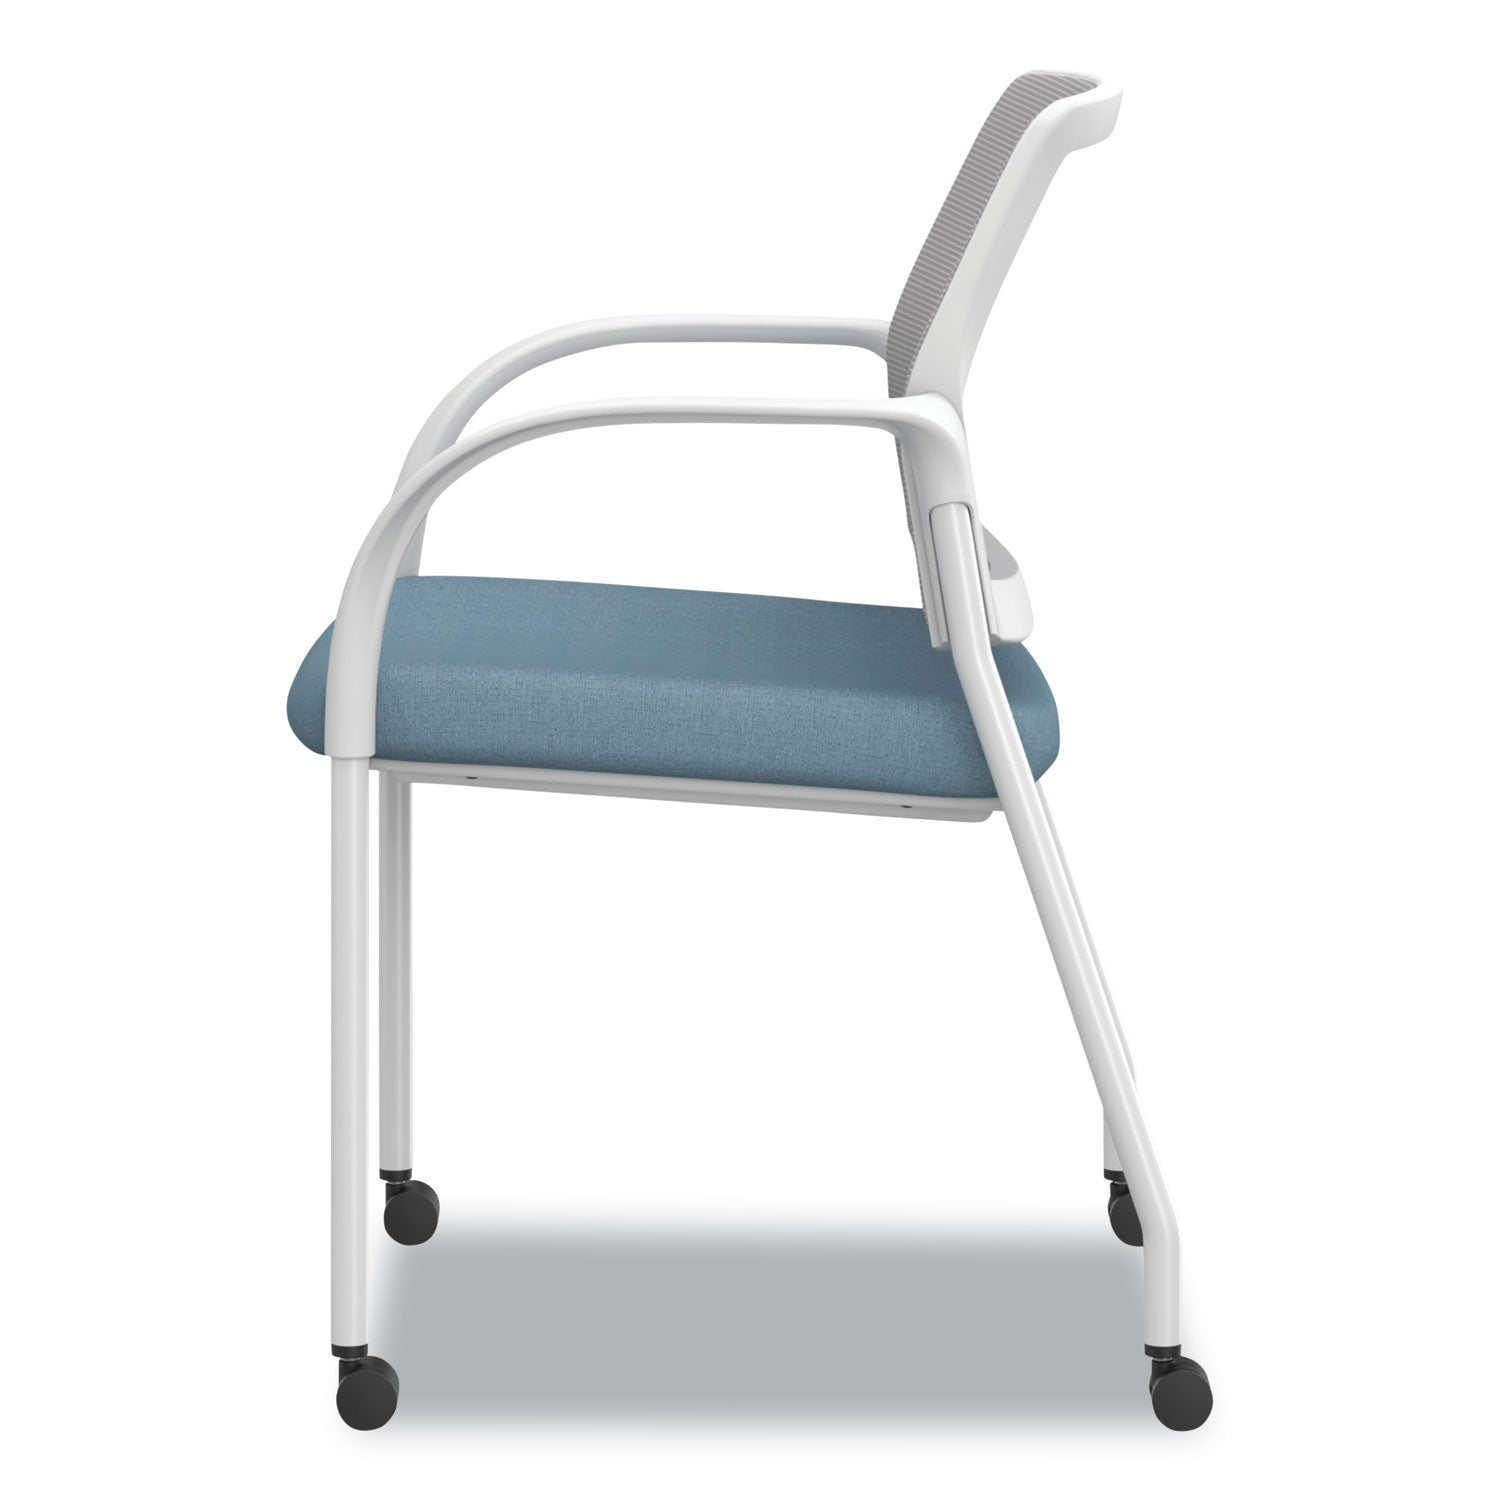 ignition-series-mesh-back-mobile-stacking-chair-fabric-seat-25-x-2175-x-335-carolina-fog-white-ships-in-7-10-bus-days_honi2s6fhfl21k7 - 2